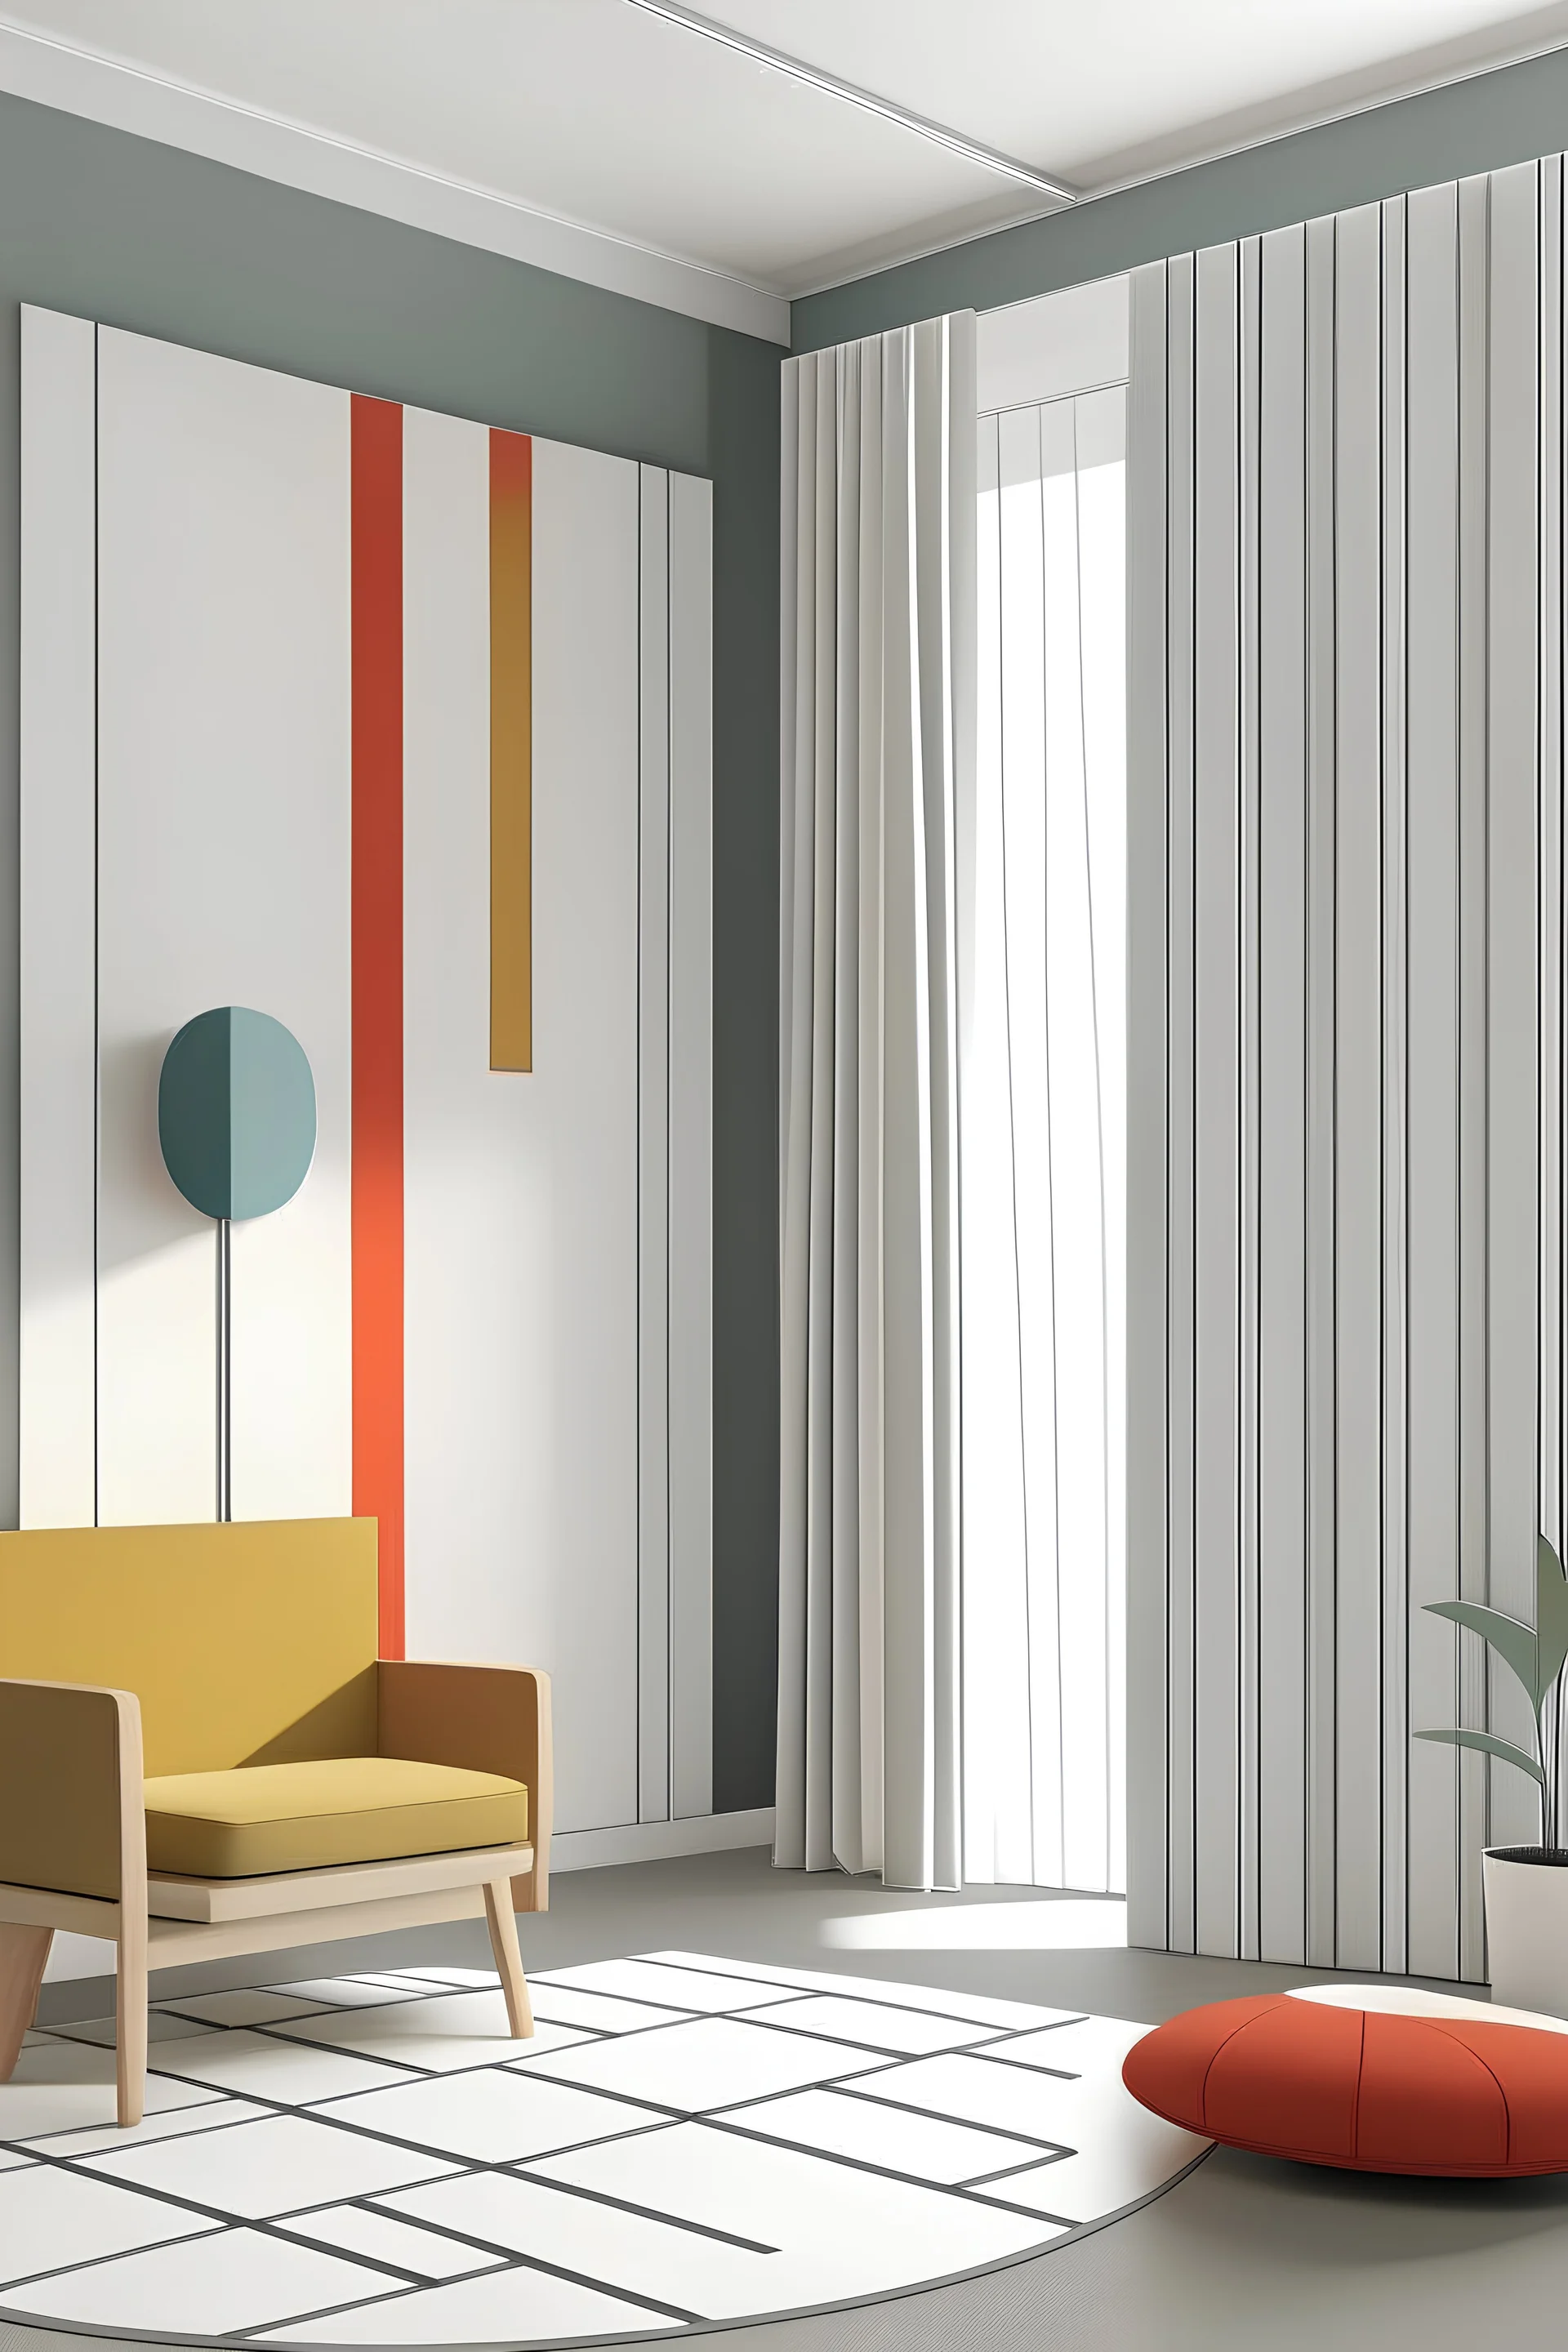 Design of textile furnishings with calm, simple colors and few decorations inspired by the Bauhaus school